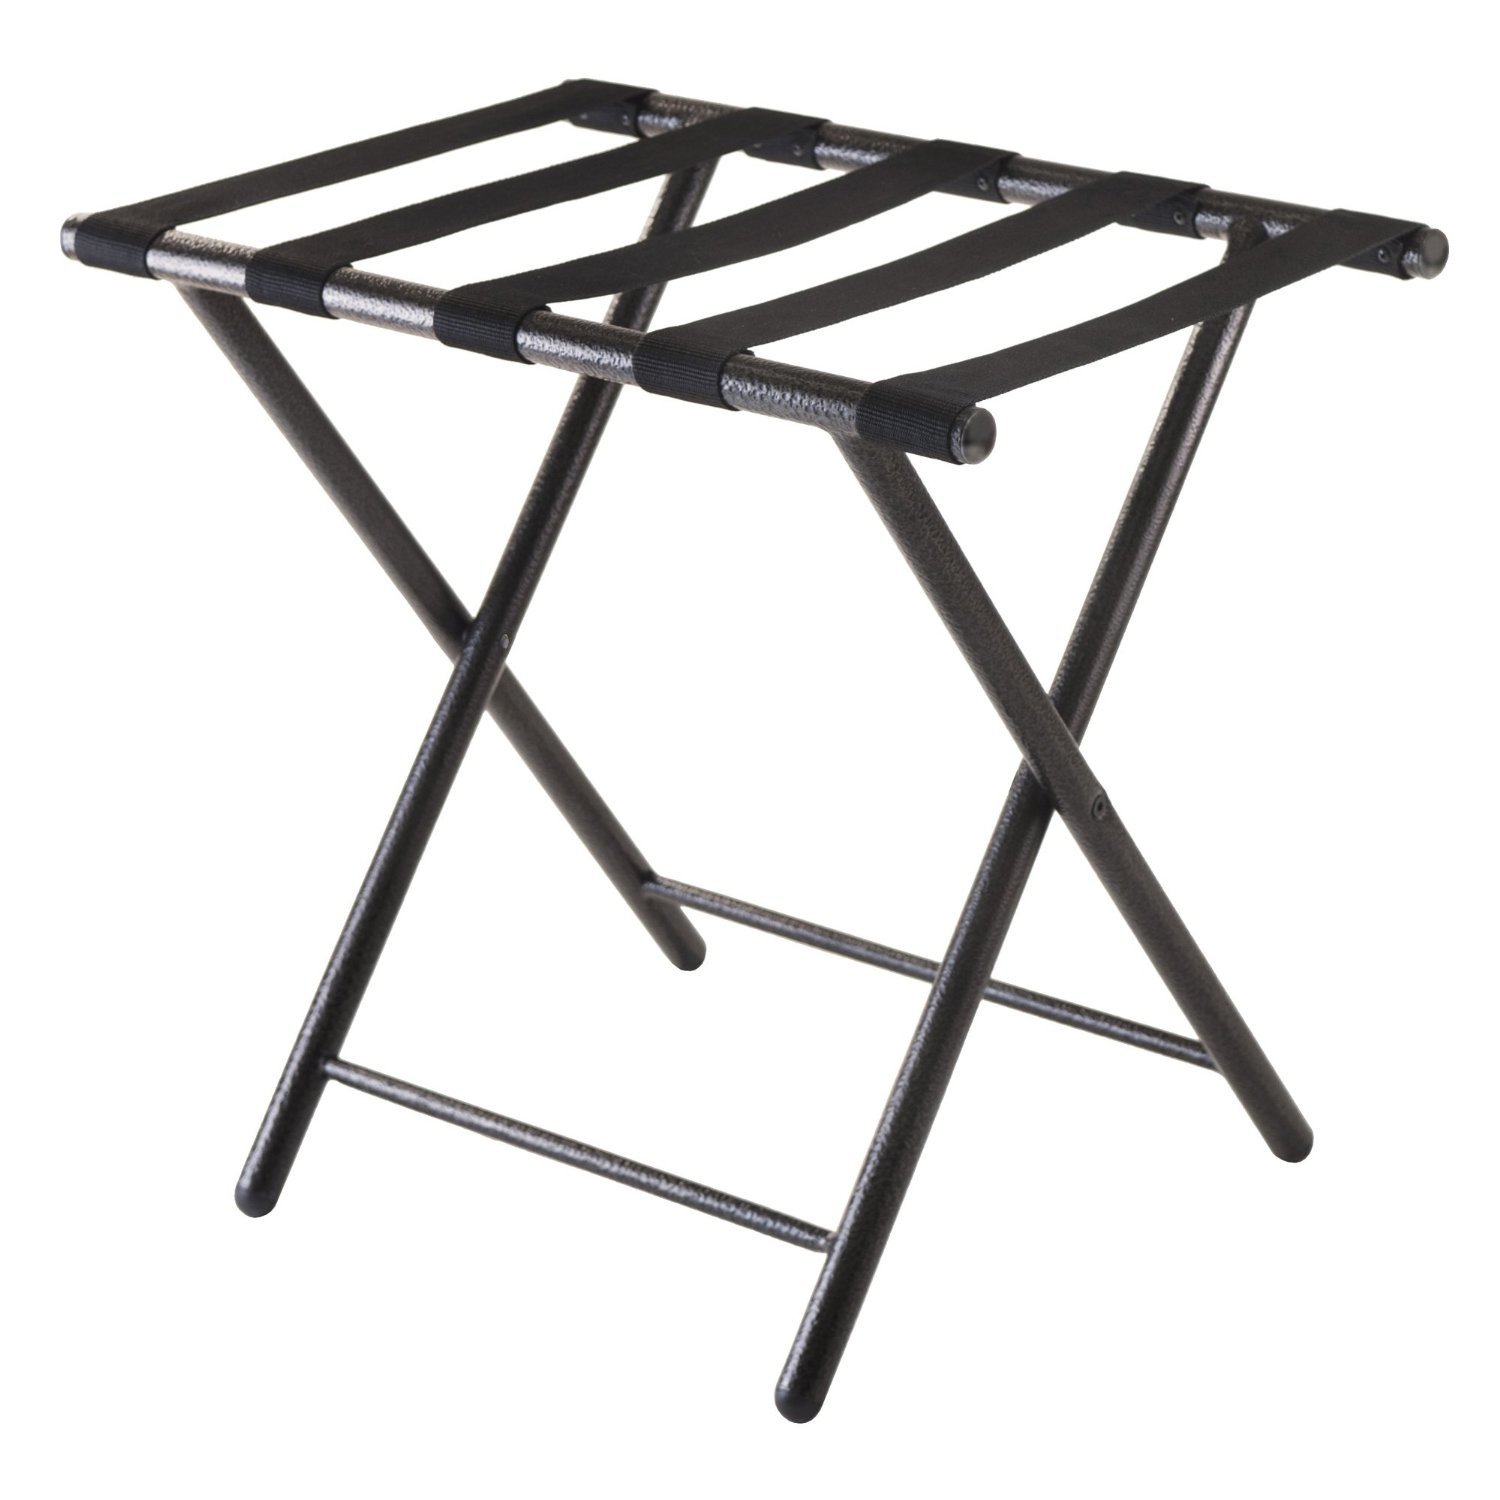  Tubular Straight Leg Hotel Display Stand With 5 Black Straps Manufactures